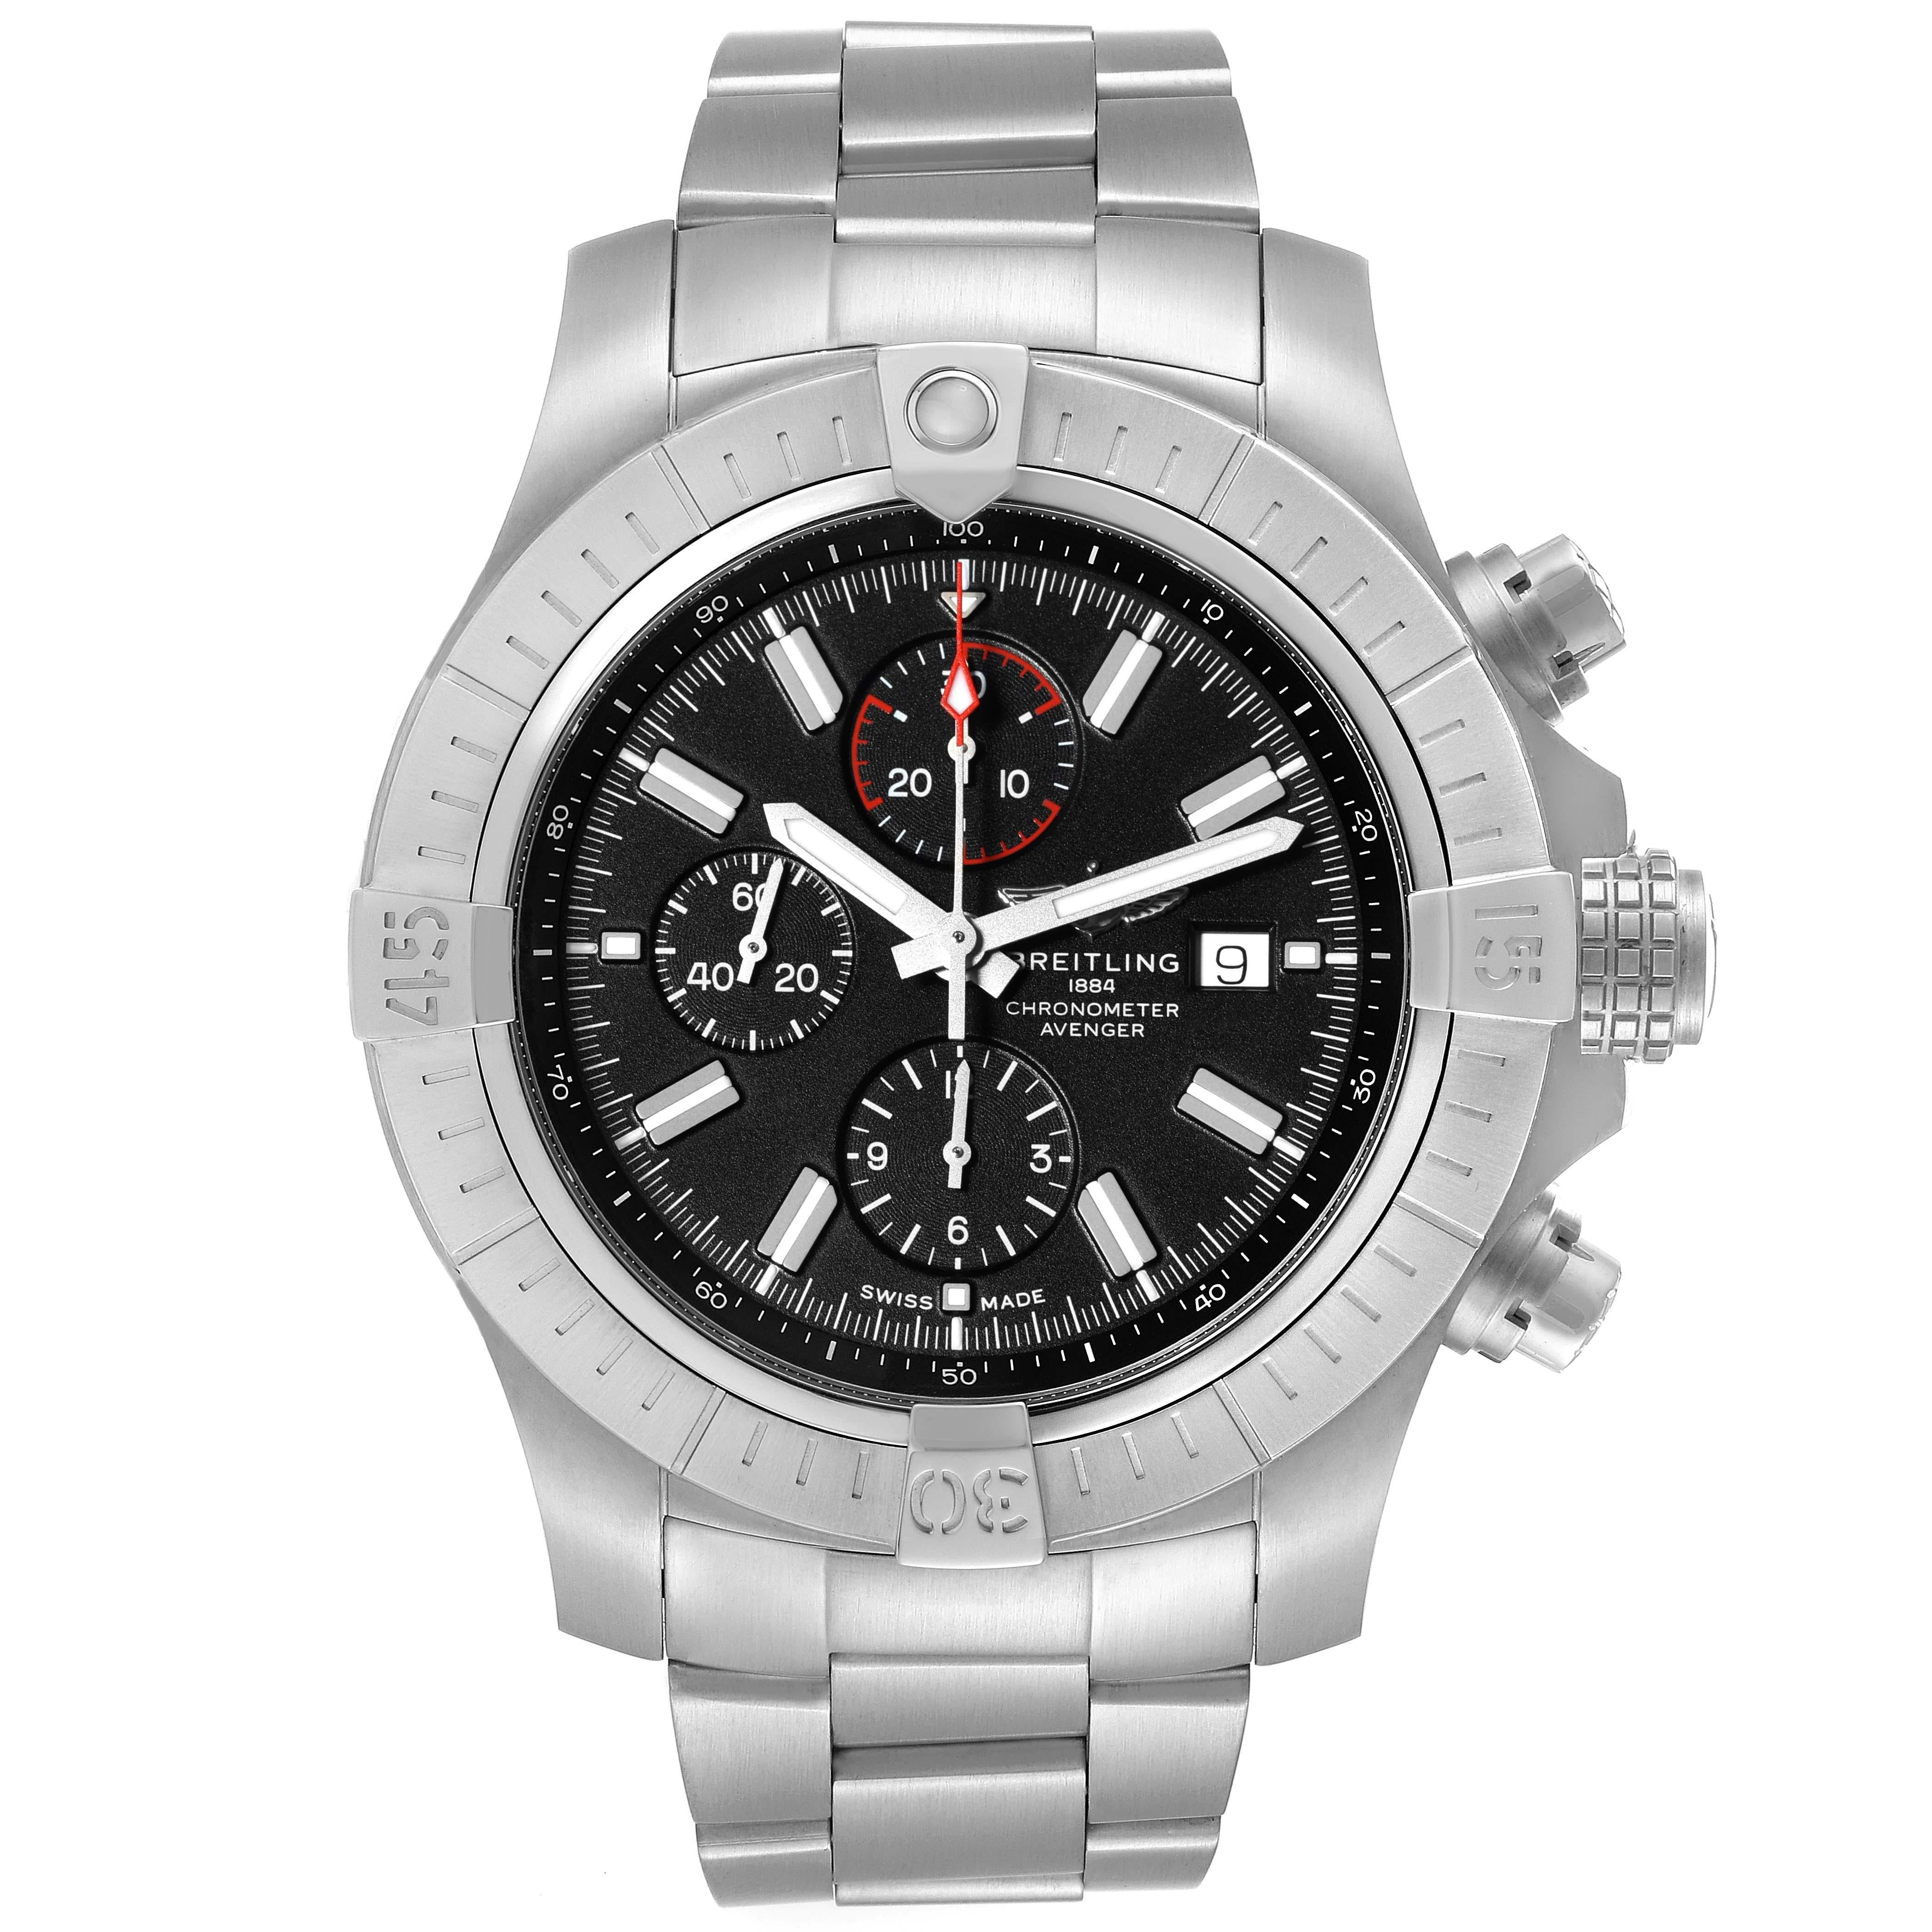 Breitling Aeromarine Super Avenger Steel Mens Watch A13375 Box Card. Automatic self-winding movement. Chronograph function. Stainless steel case 48 mm in diameter with screwed-locked crown and pushers. Case thickness 17.75 mm. Stainless steel